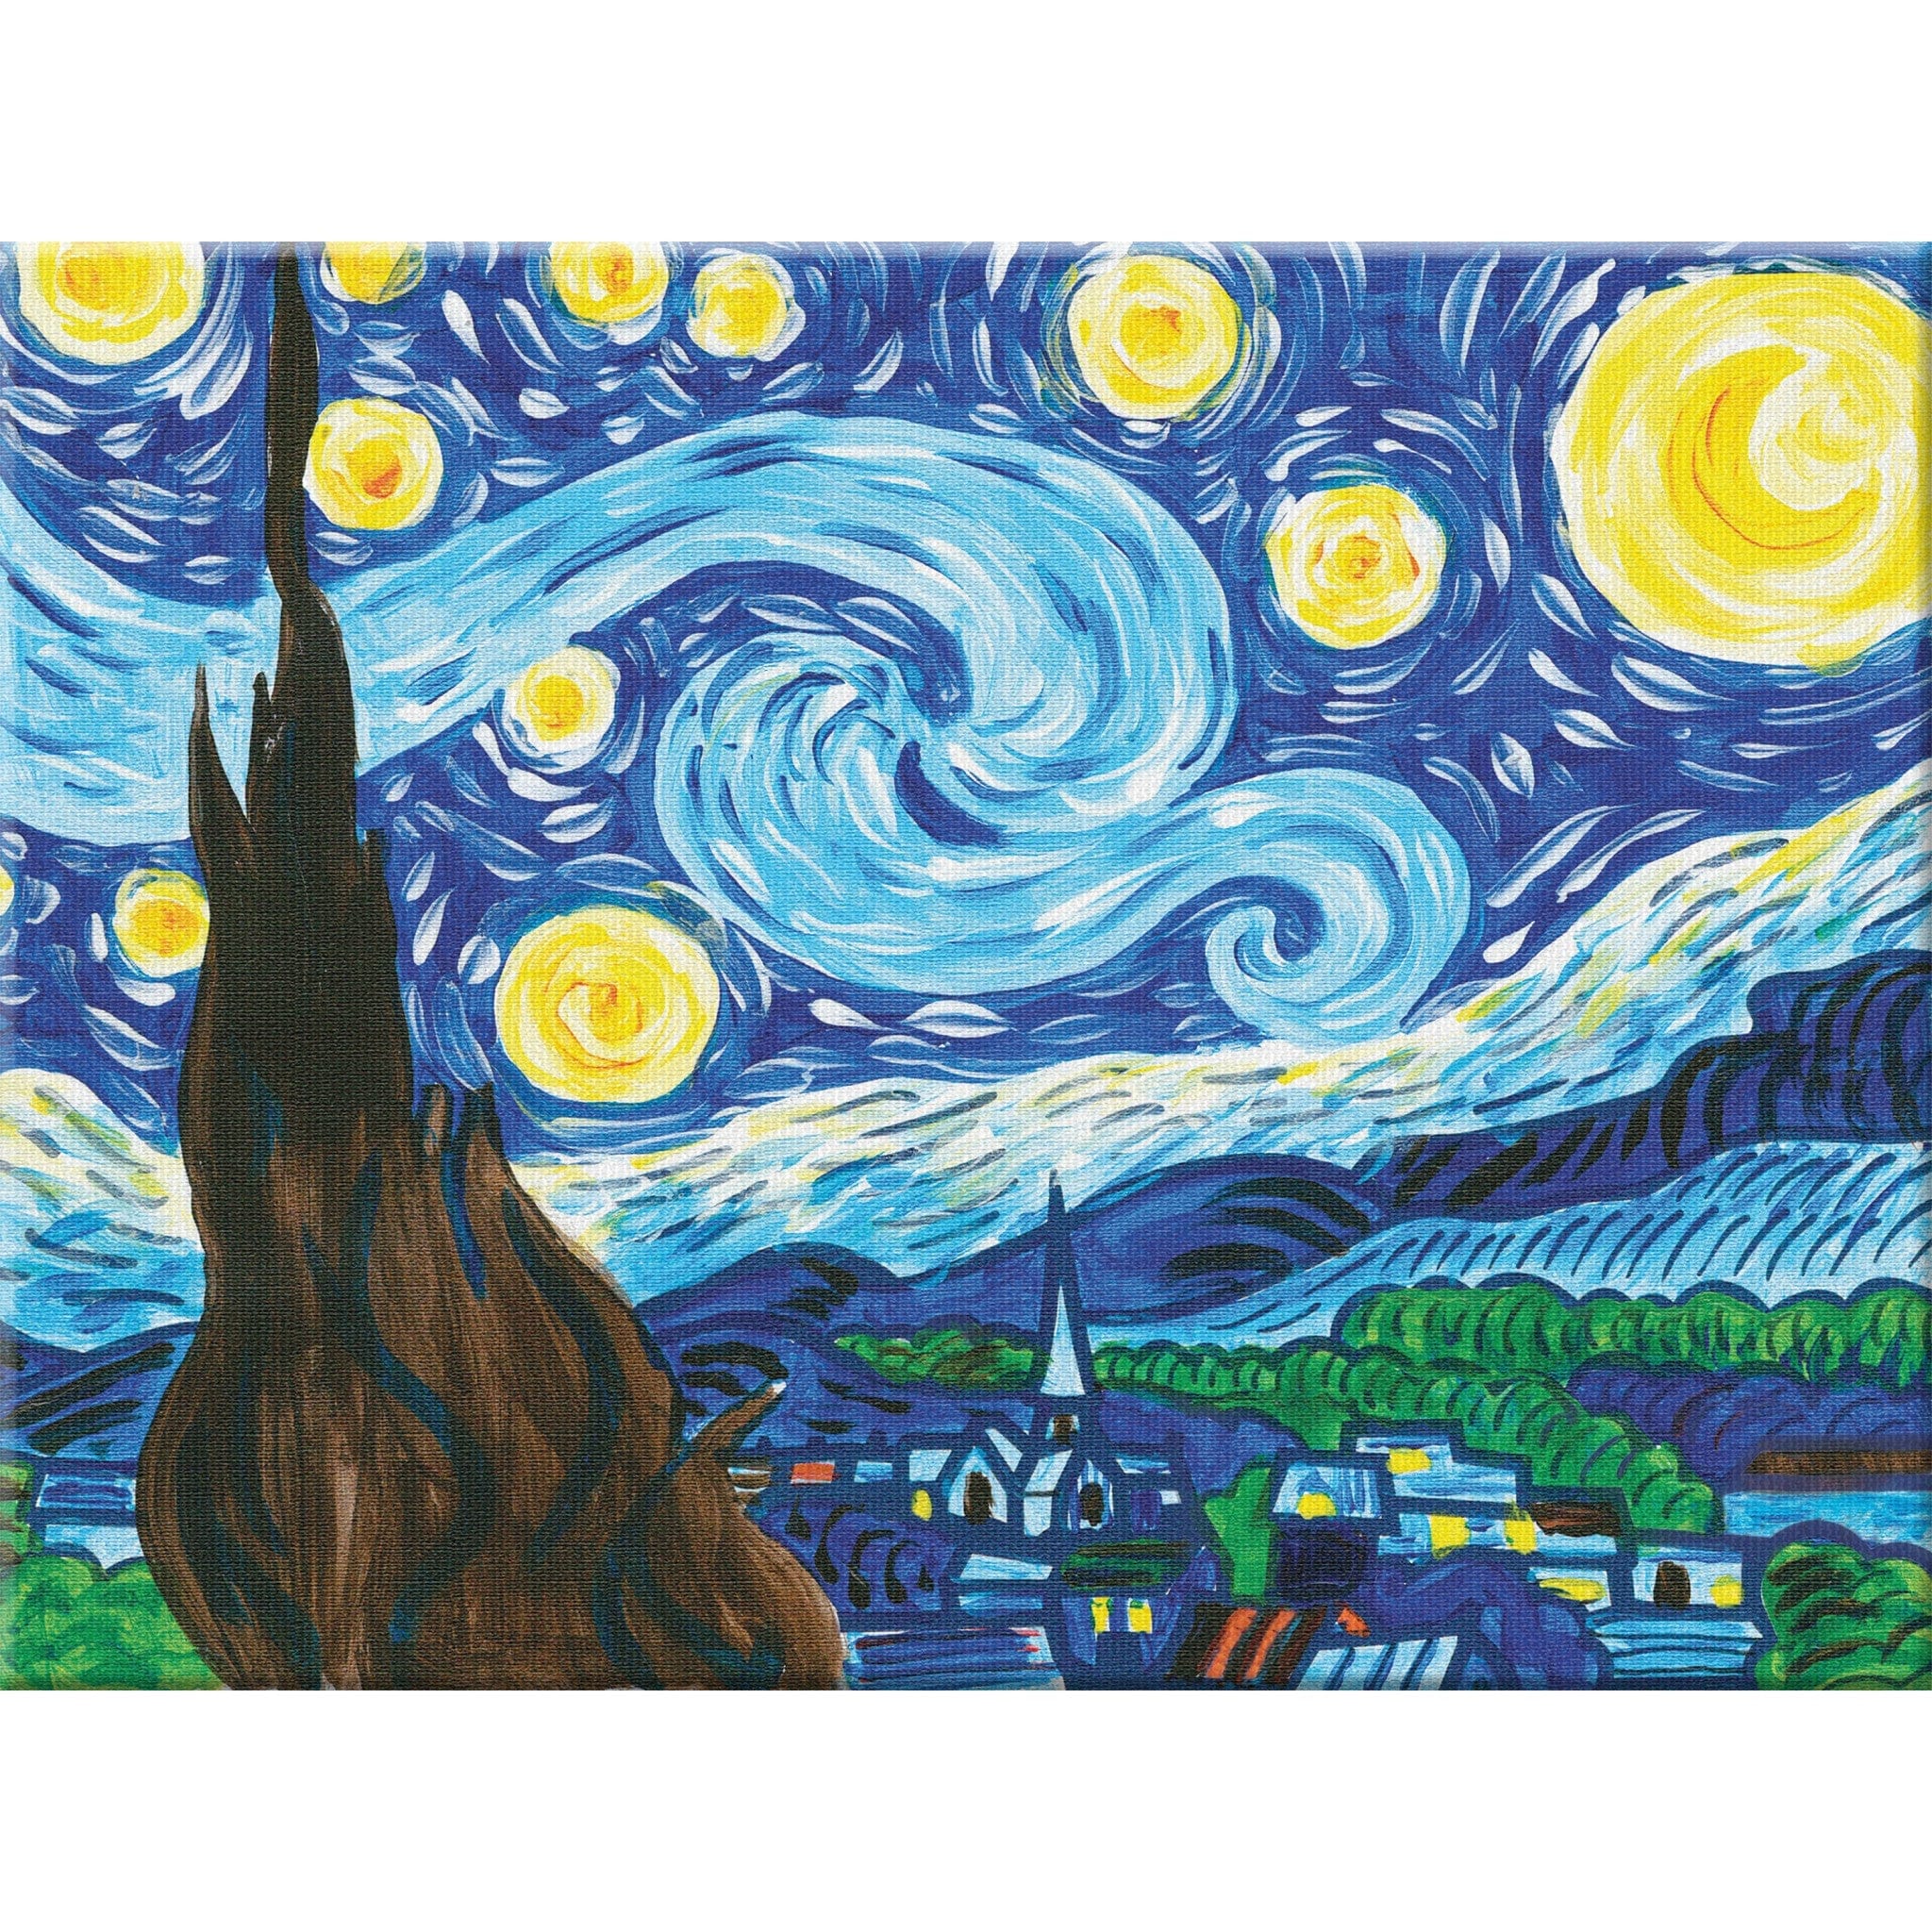 Faber Castell Faber Castell Paint by Number Museum Series The Starry Night - Little Miss Muffin Children & Home